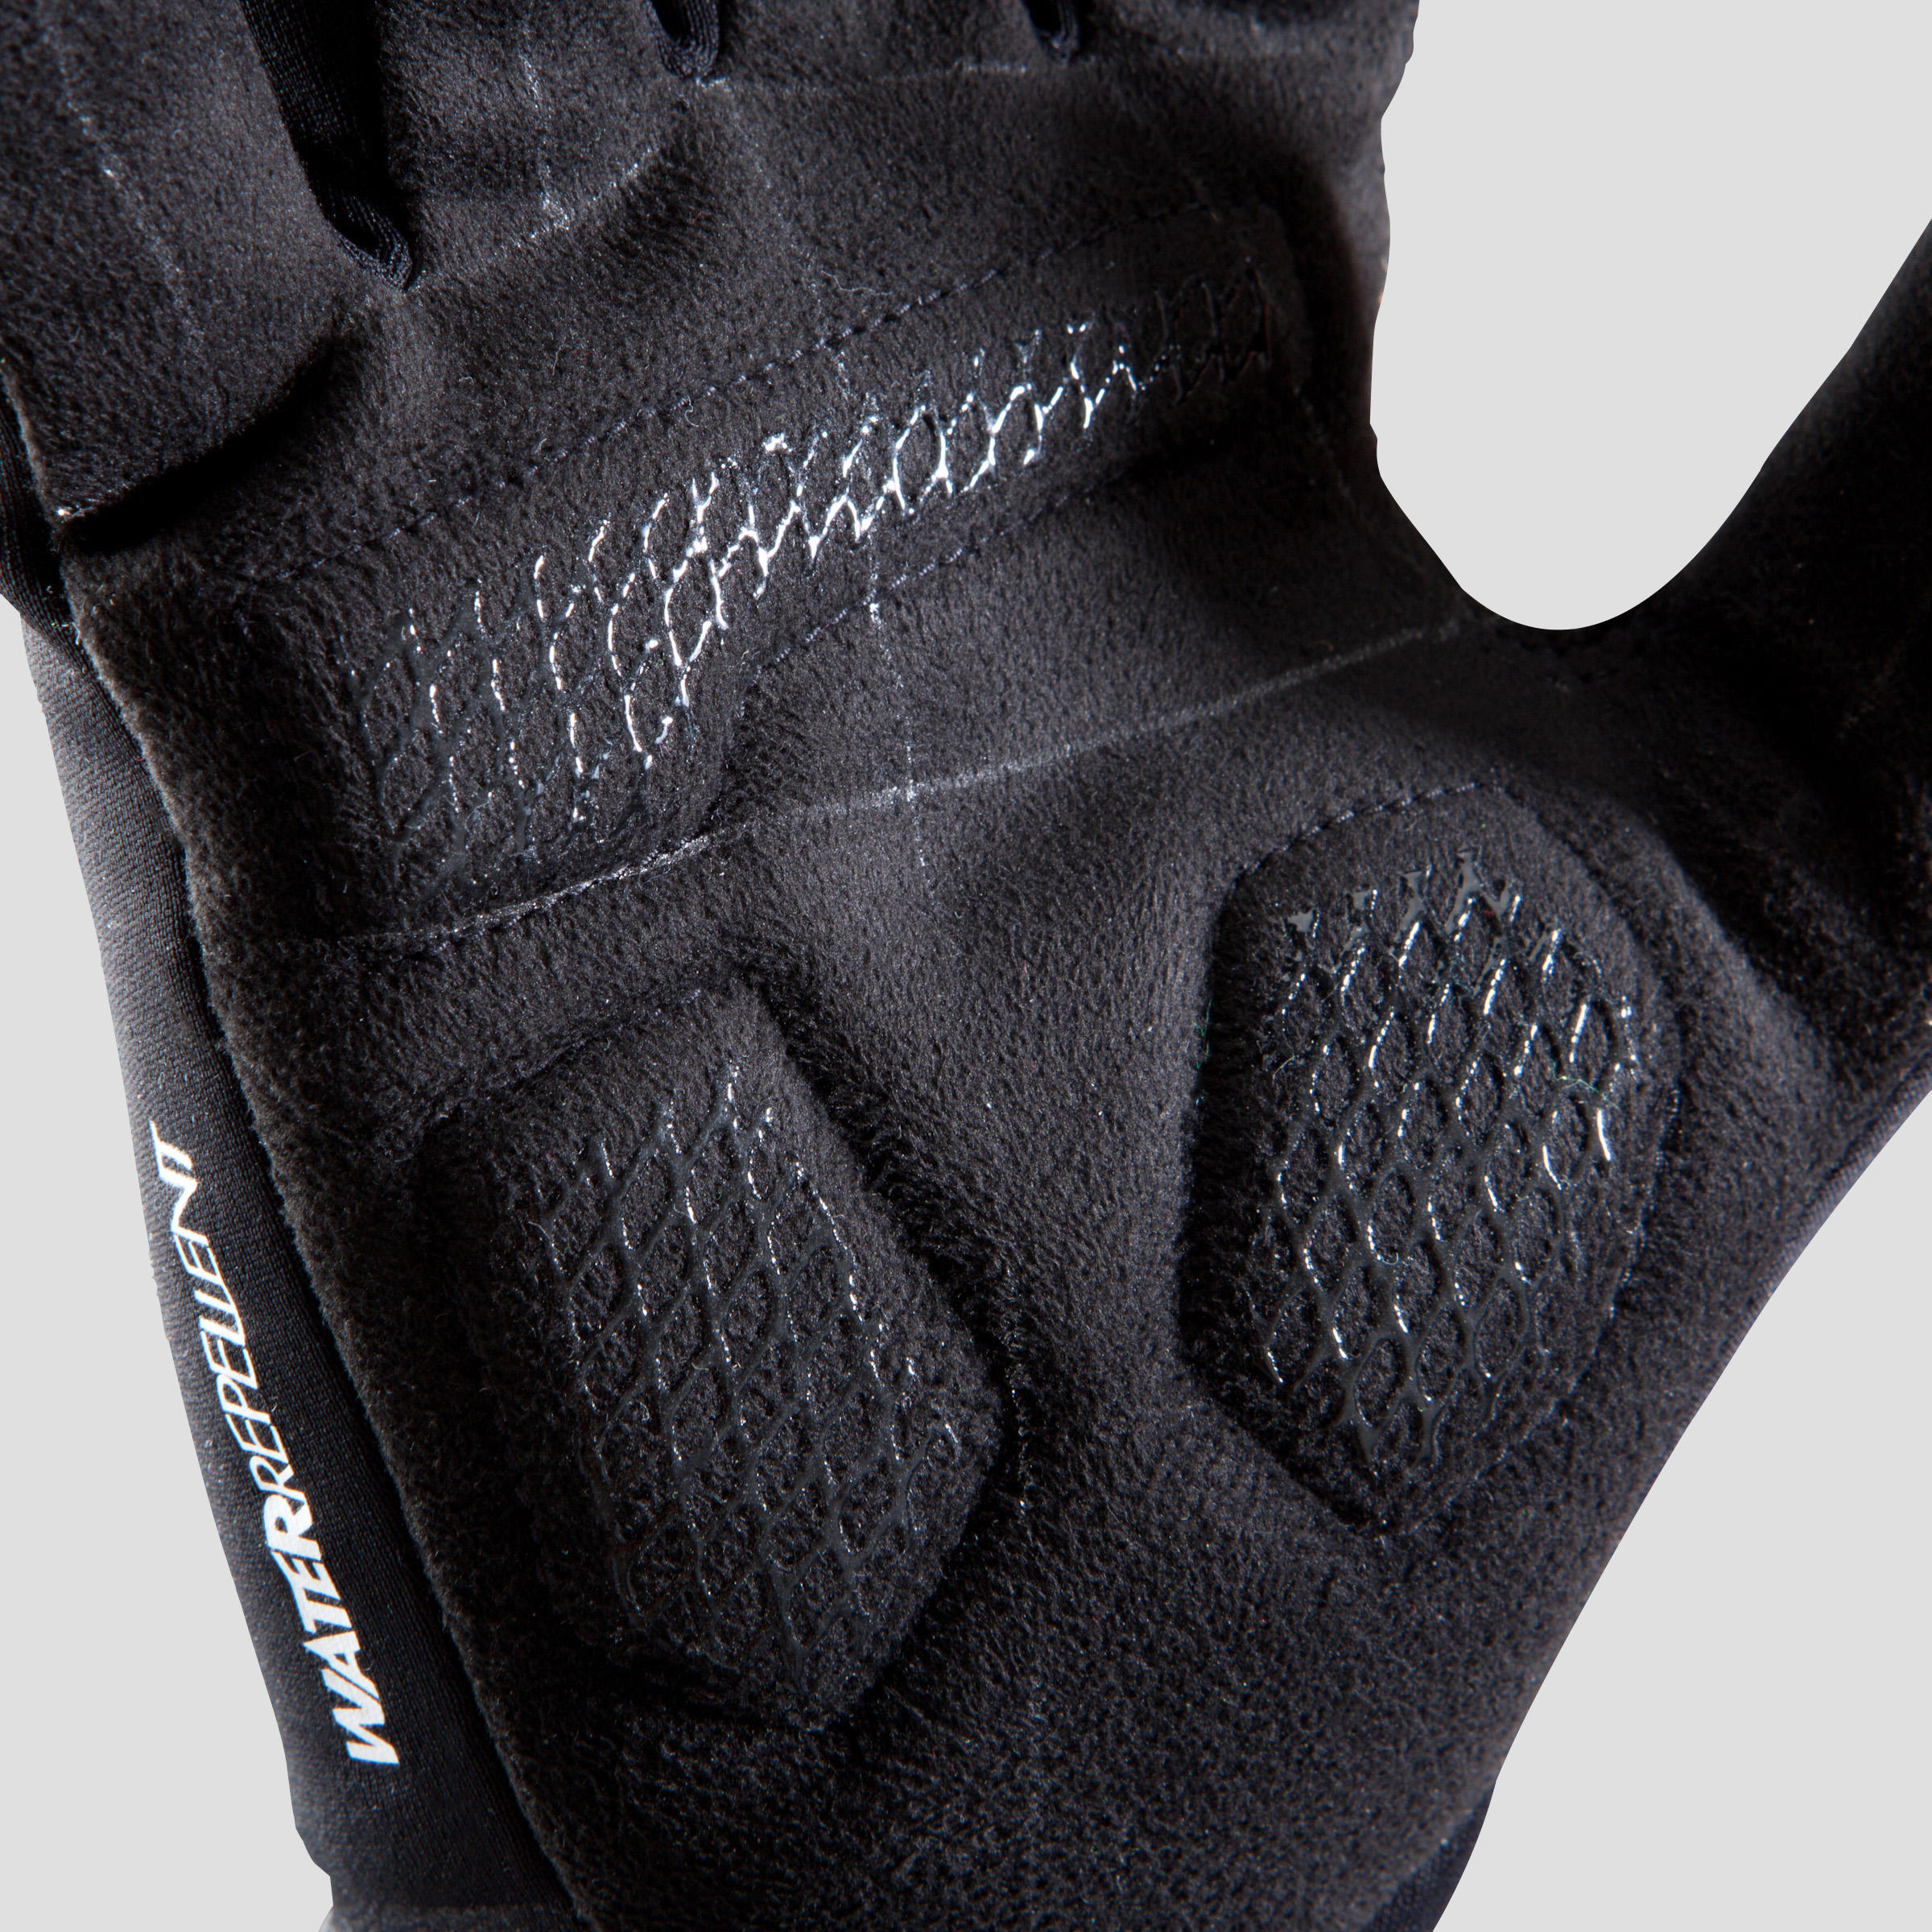 500 Cycling Gloves for Spring/Autumn - Black 4/9